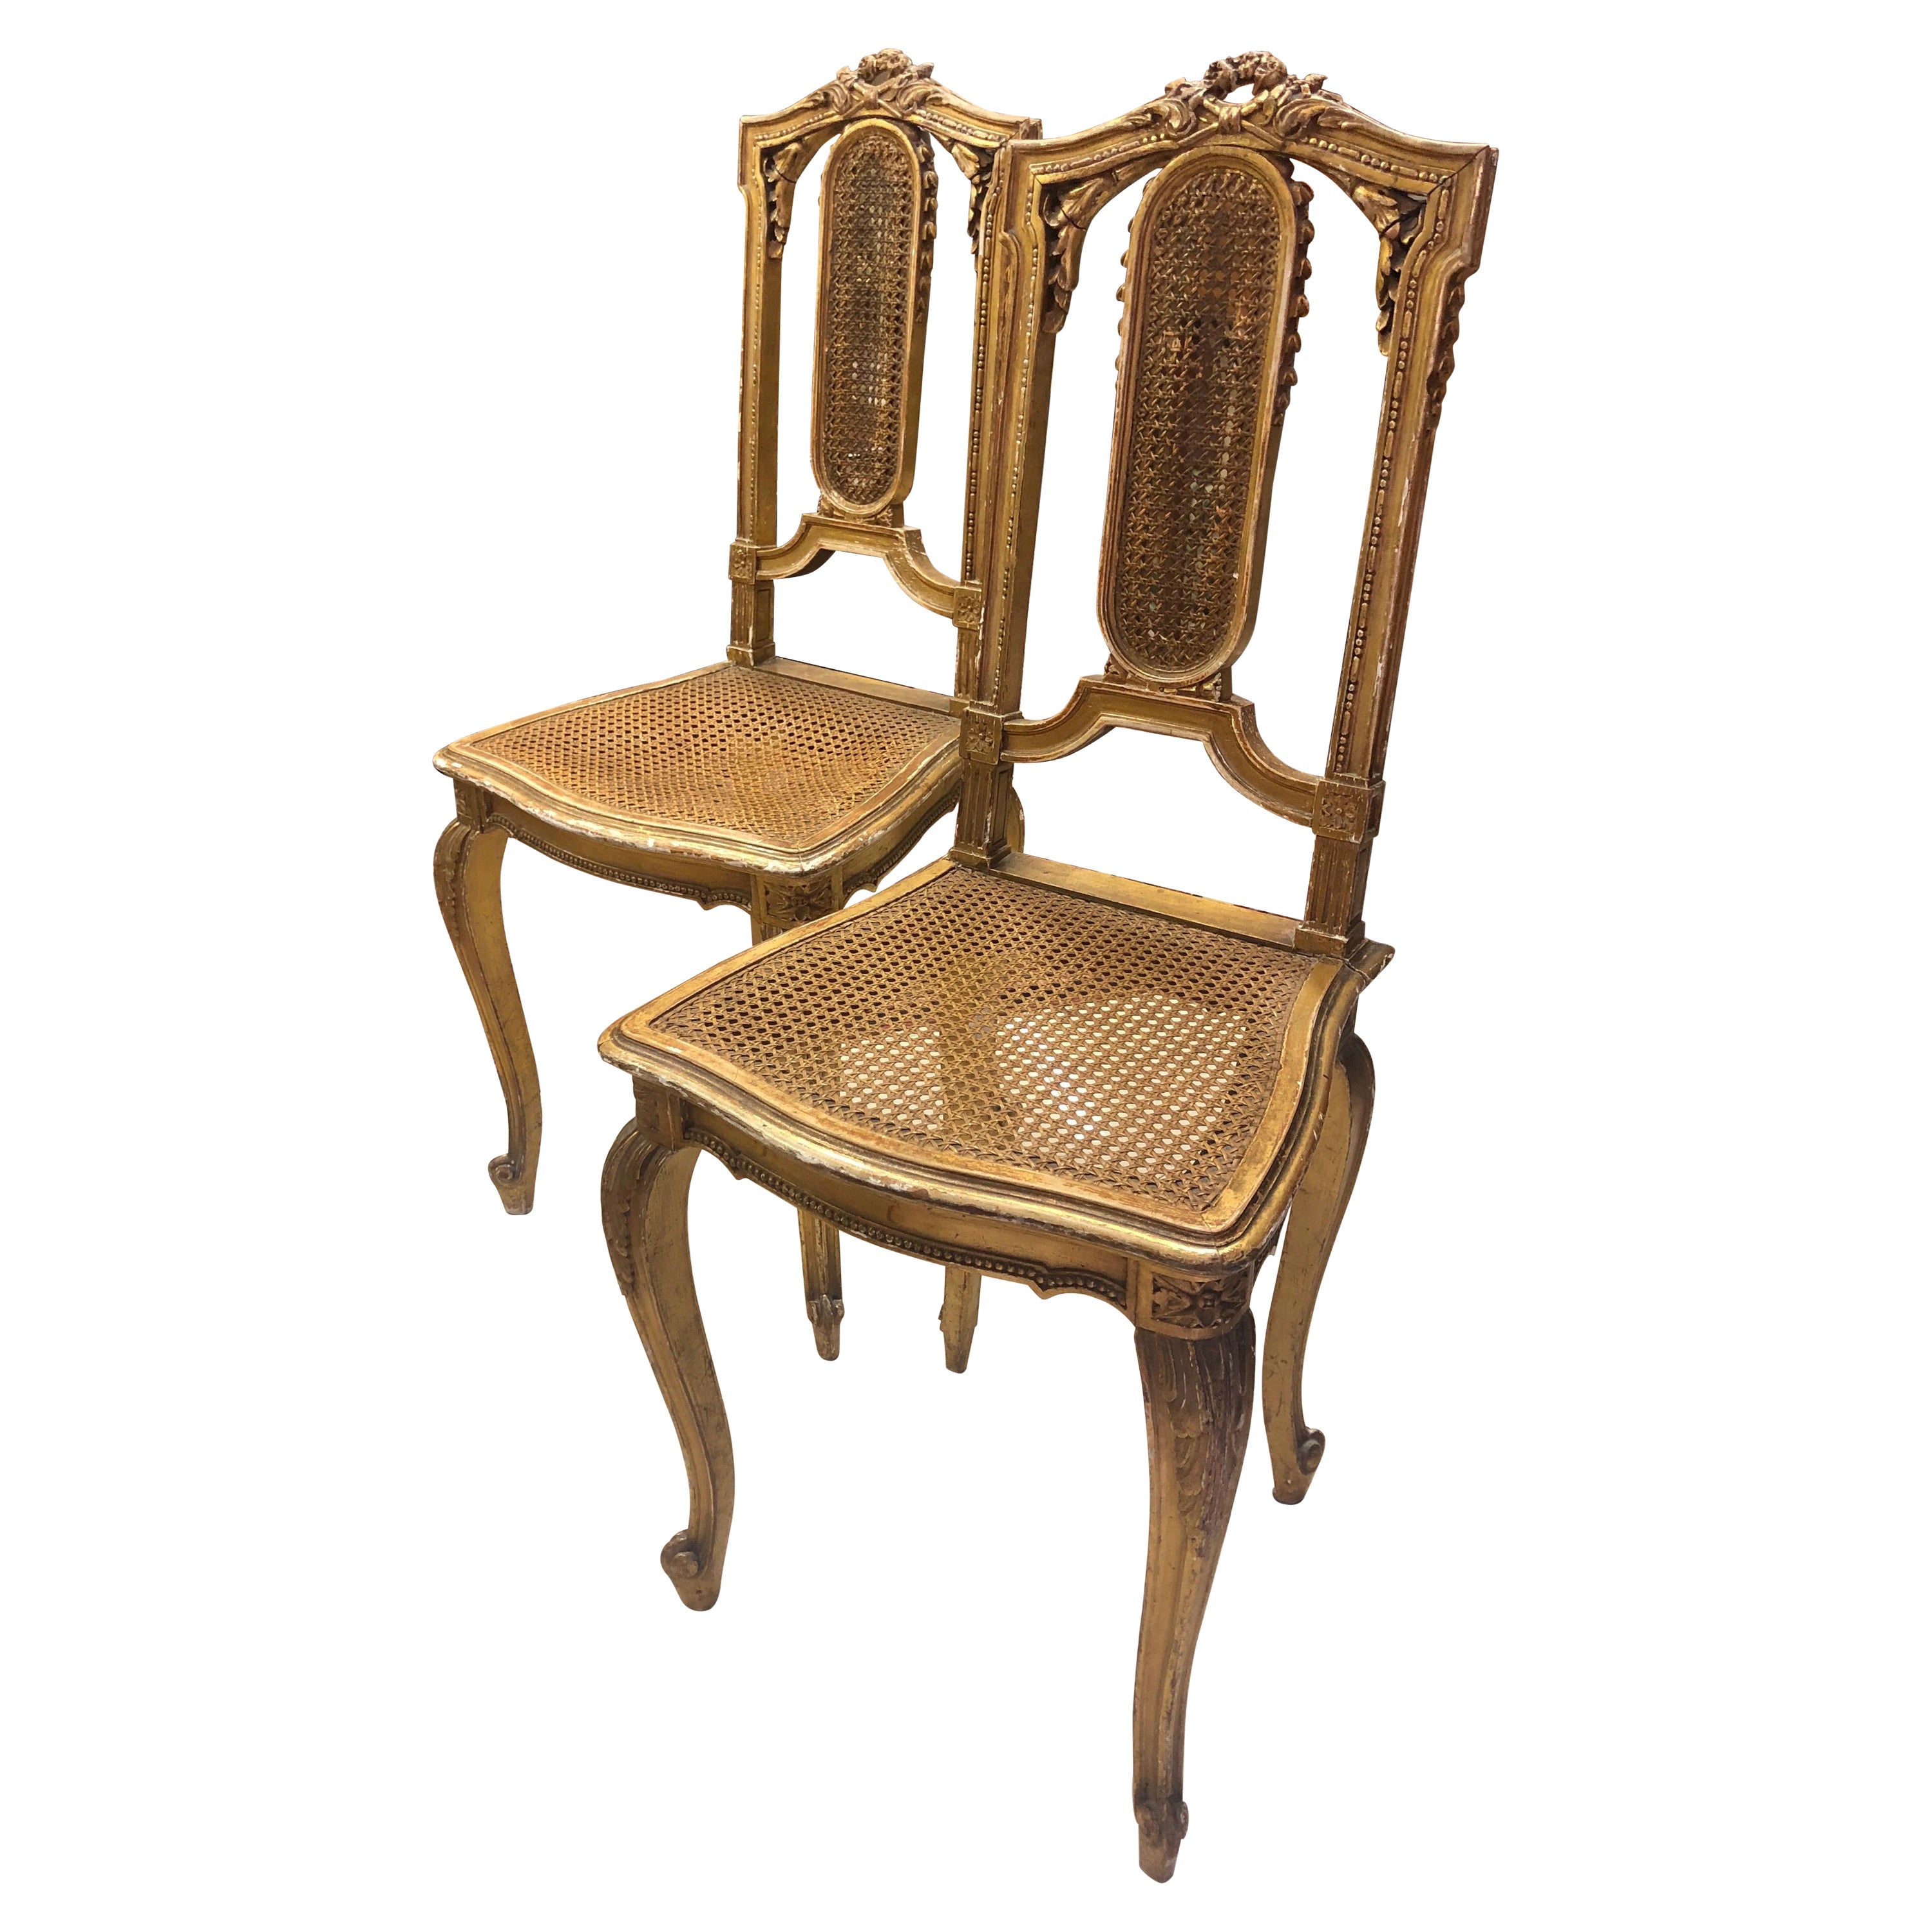 19th Century French Gilt Wood Side Chairs Decorated in Louis XVI Style